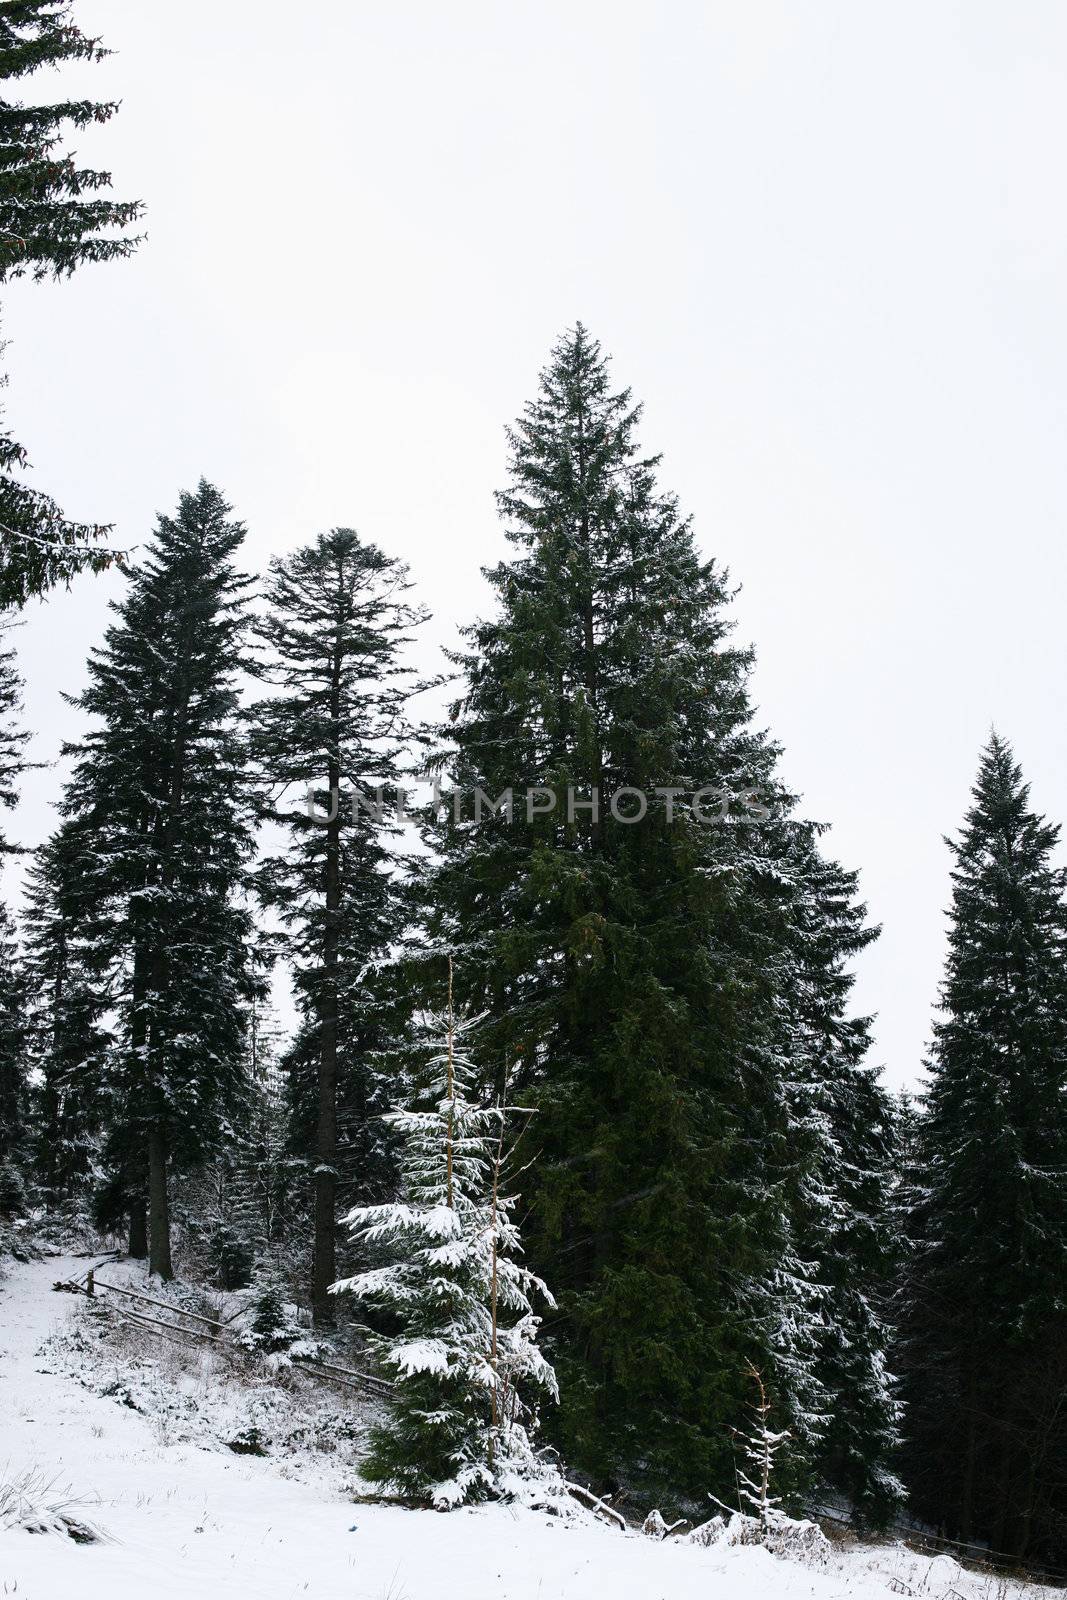 An image of high firtrees in winter forest